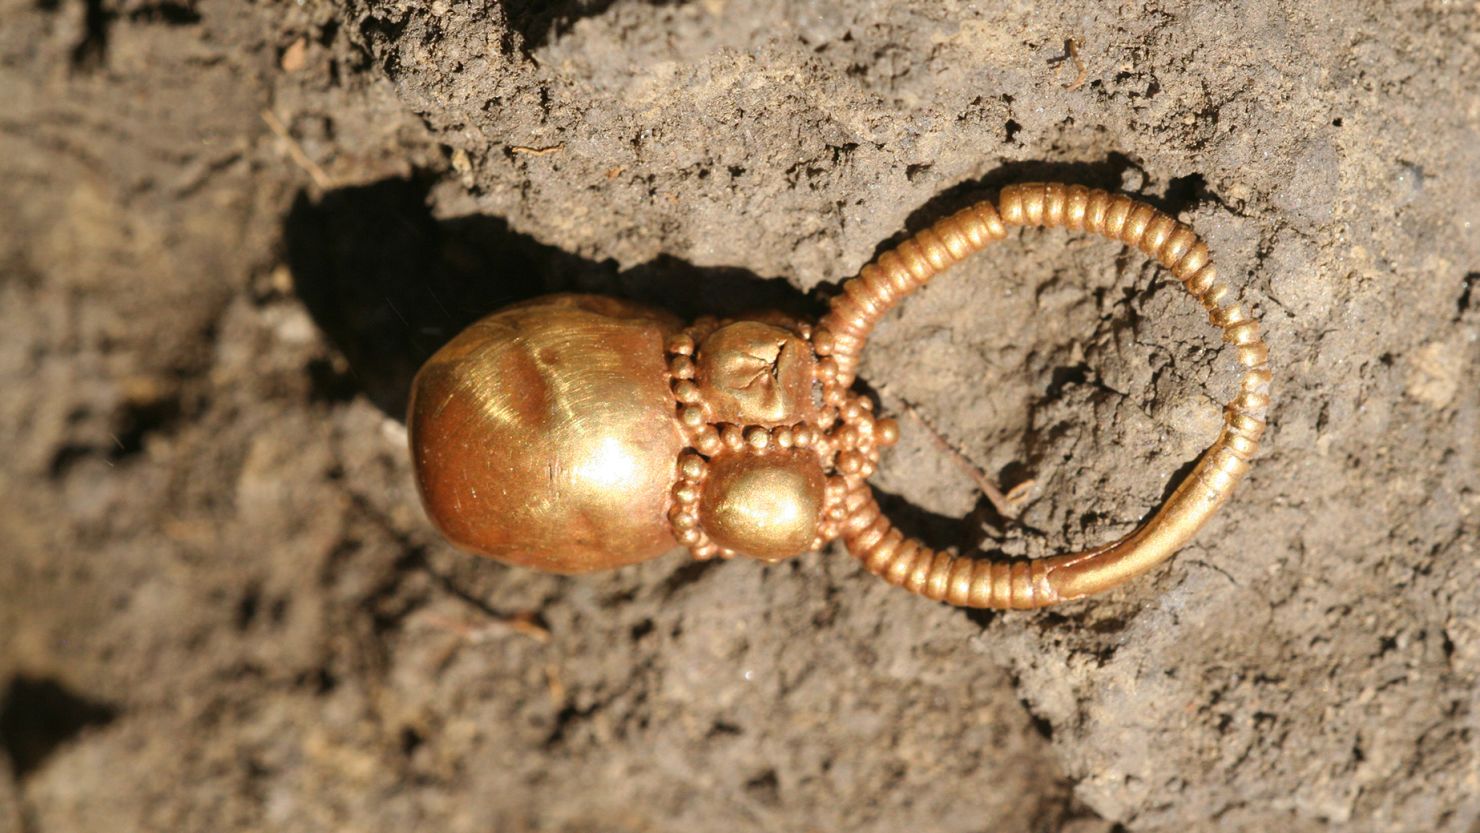 A gold earring found in an Avar man's seventh century grave in Hungary is one artifact indicating the opulence of the warrior people's burials.